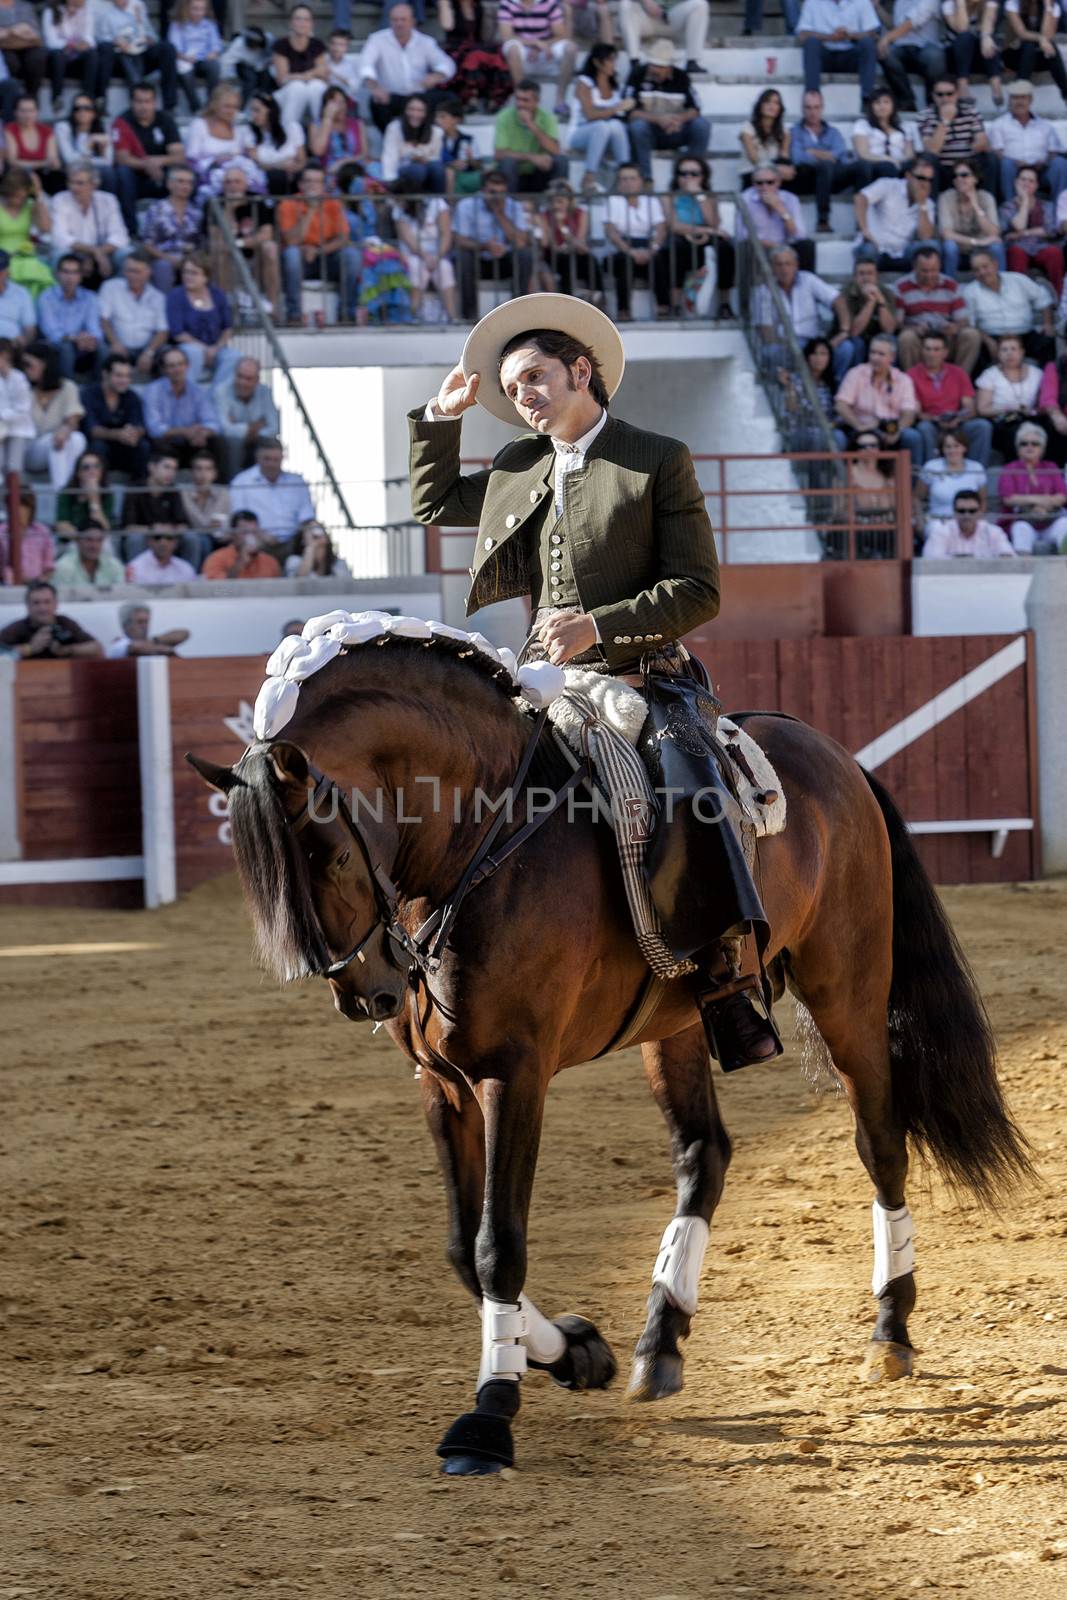 Pozoblanco, Cordoba province, SPAIN- 25 september 2011: Spanish bullfighter on horseback Diego Ventura bullfighting on horseback, removing its hat to offer to the public its performance, in Pozoblanco, Cordoba province, Andalusia, Spain